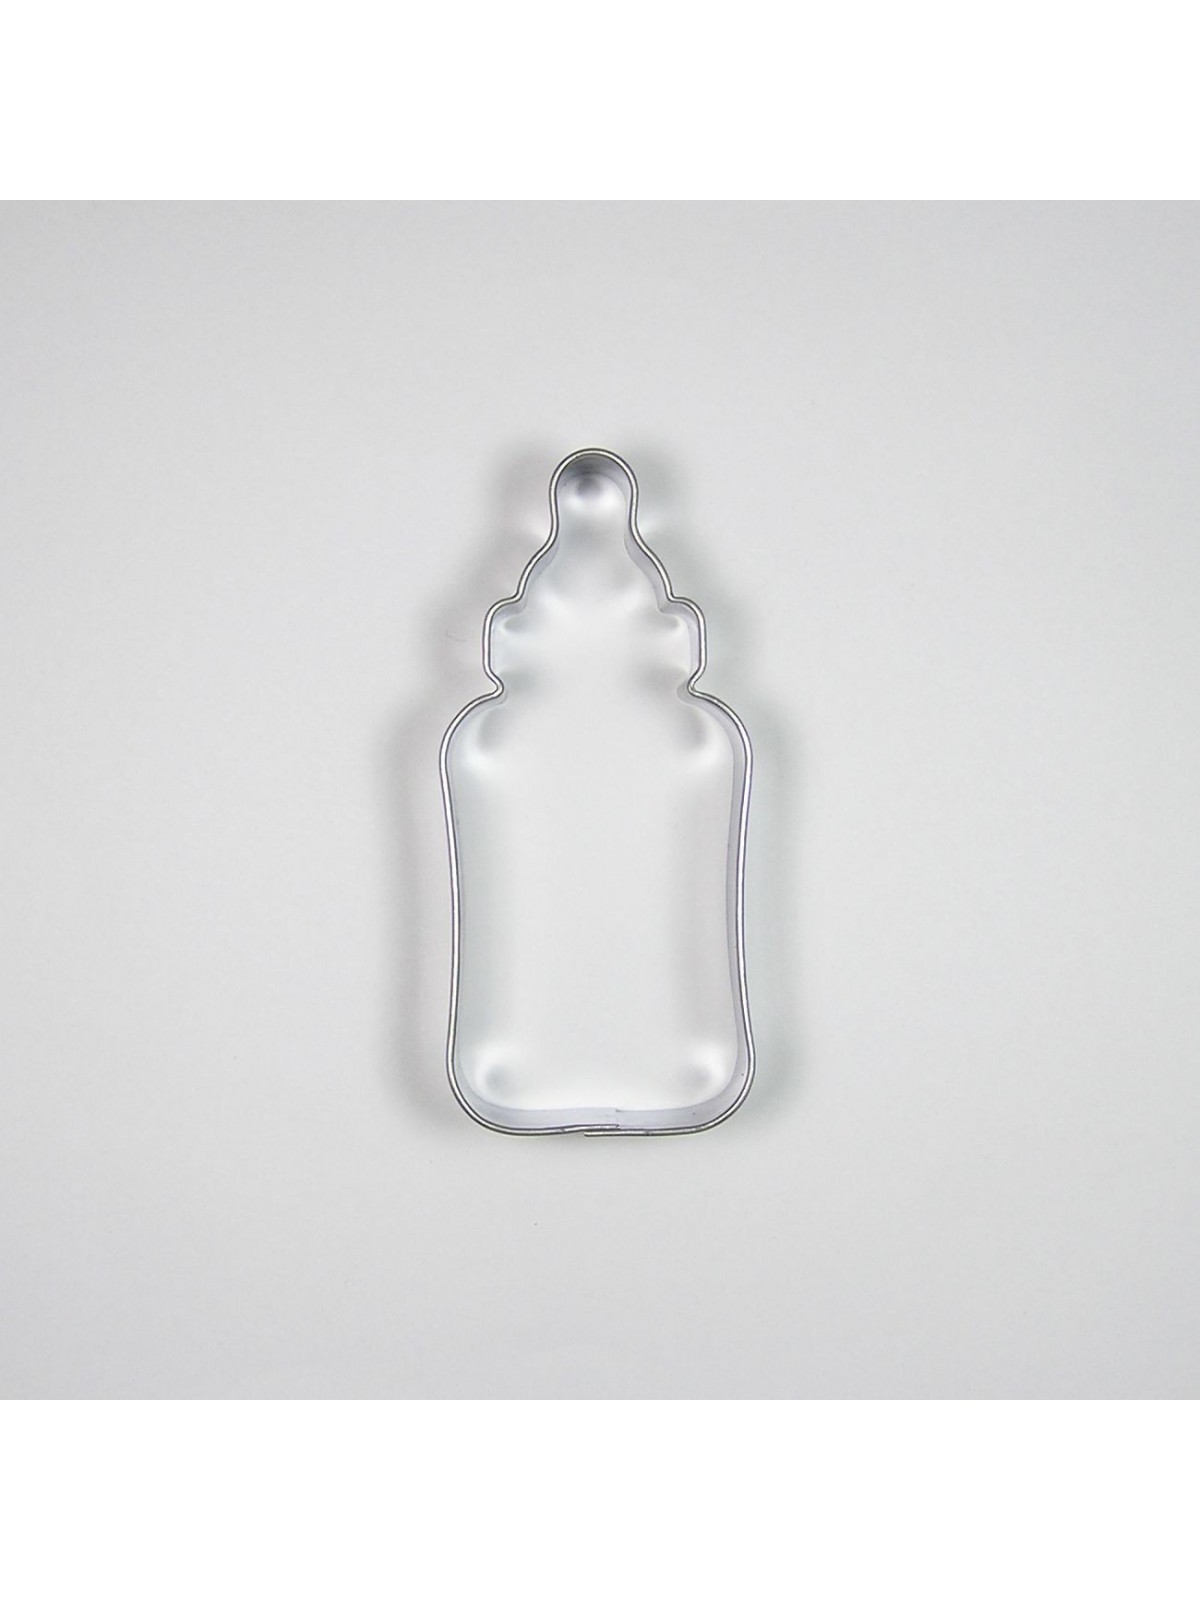 Stainless steel cutter - baby bottle